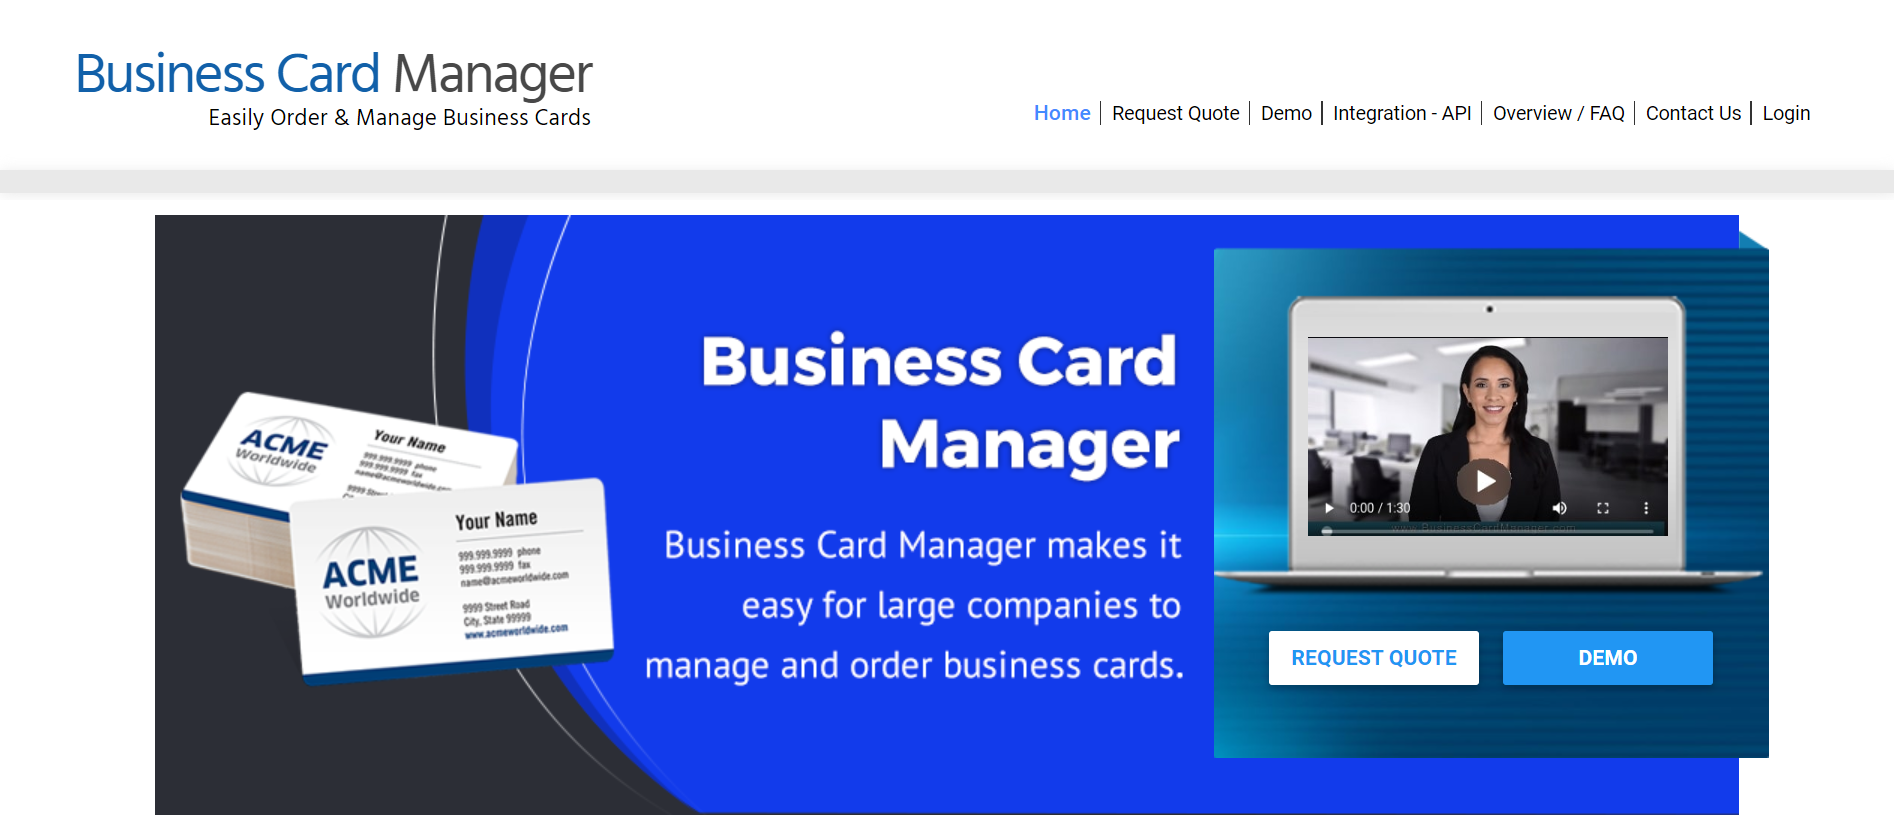 CCA Business Cards - Print - Manage – BestBuy